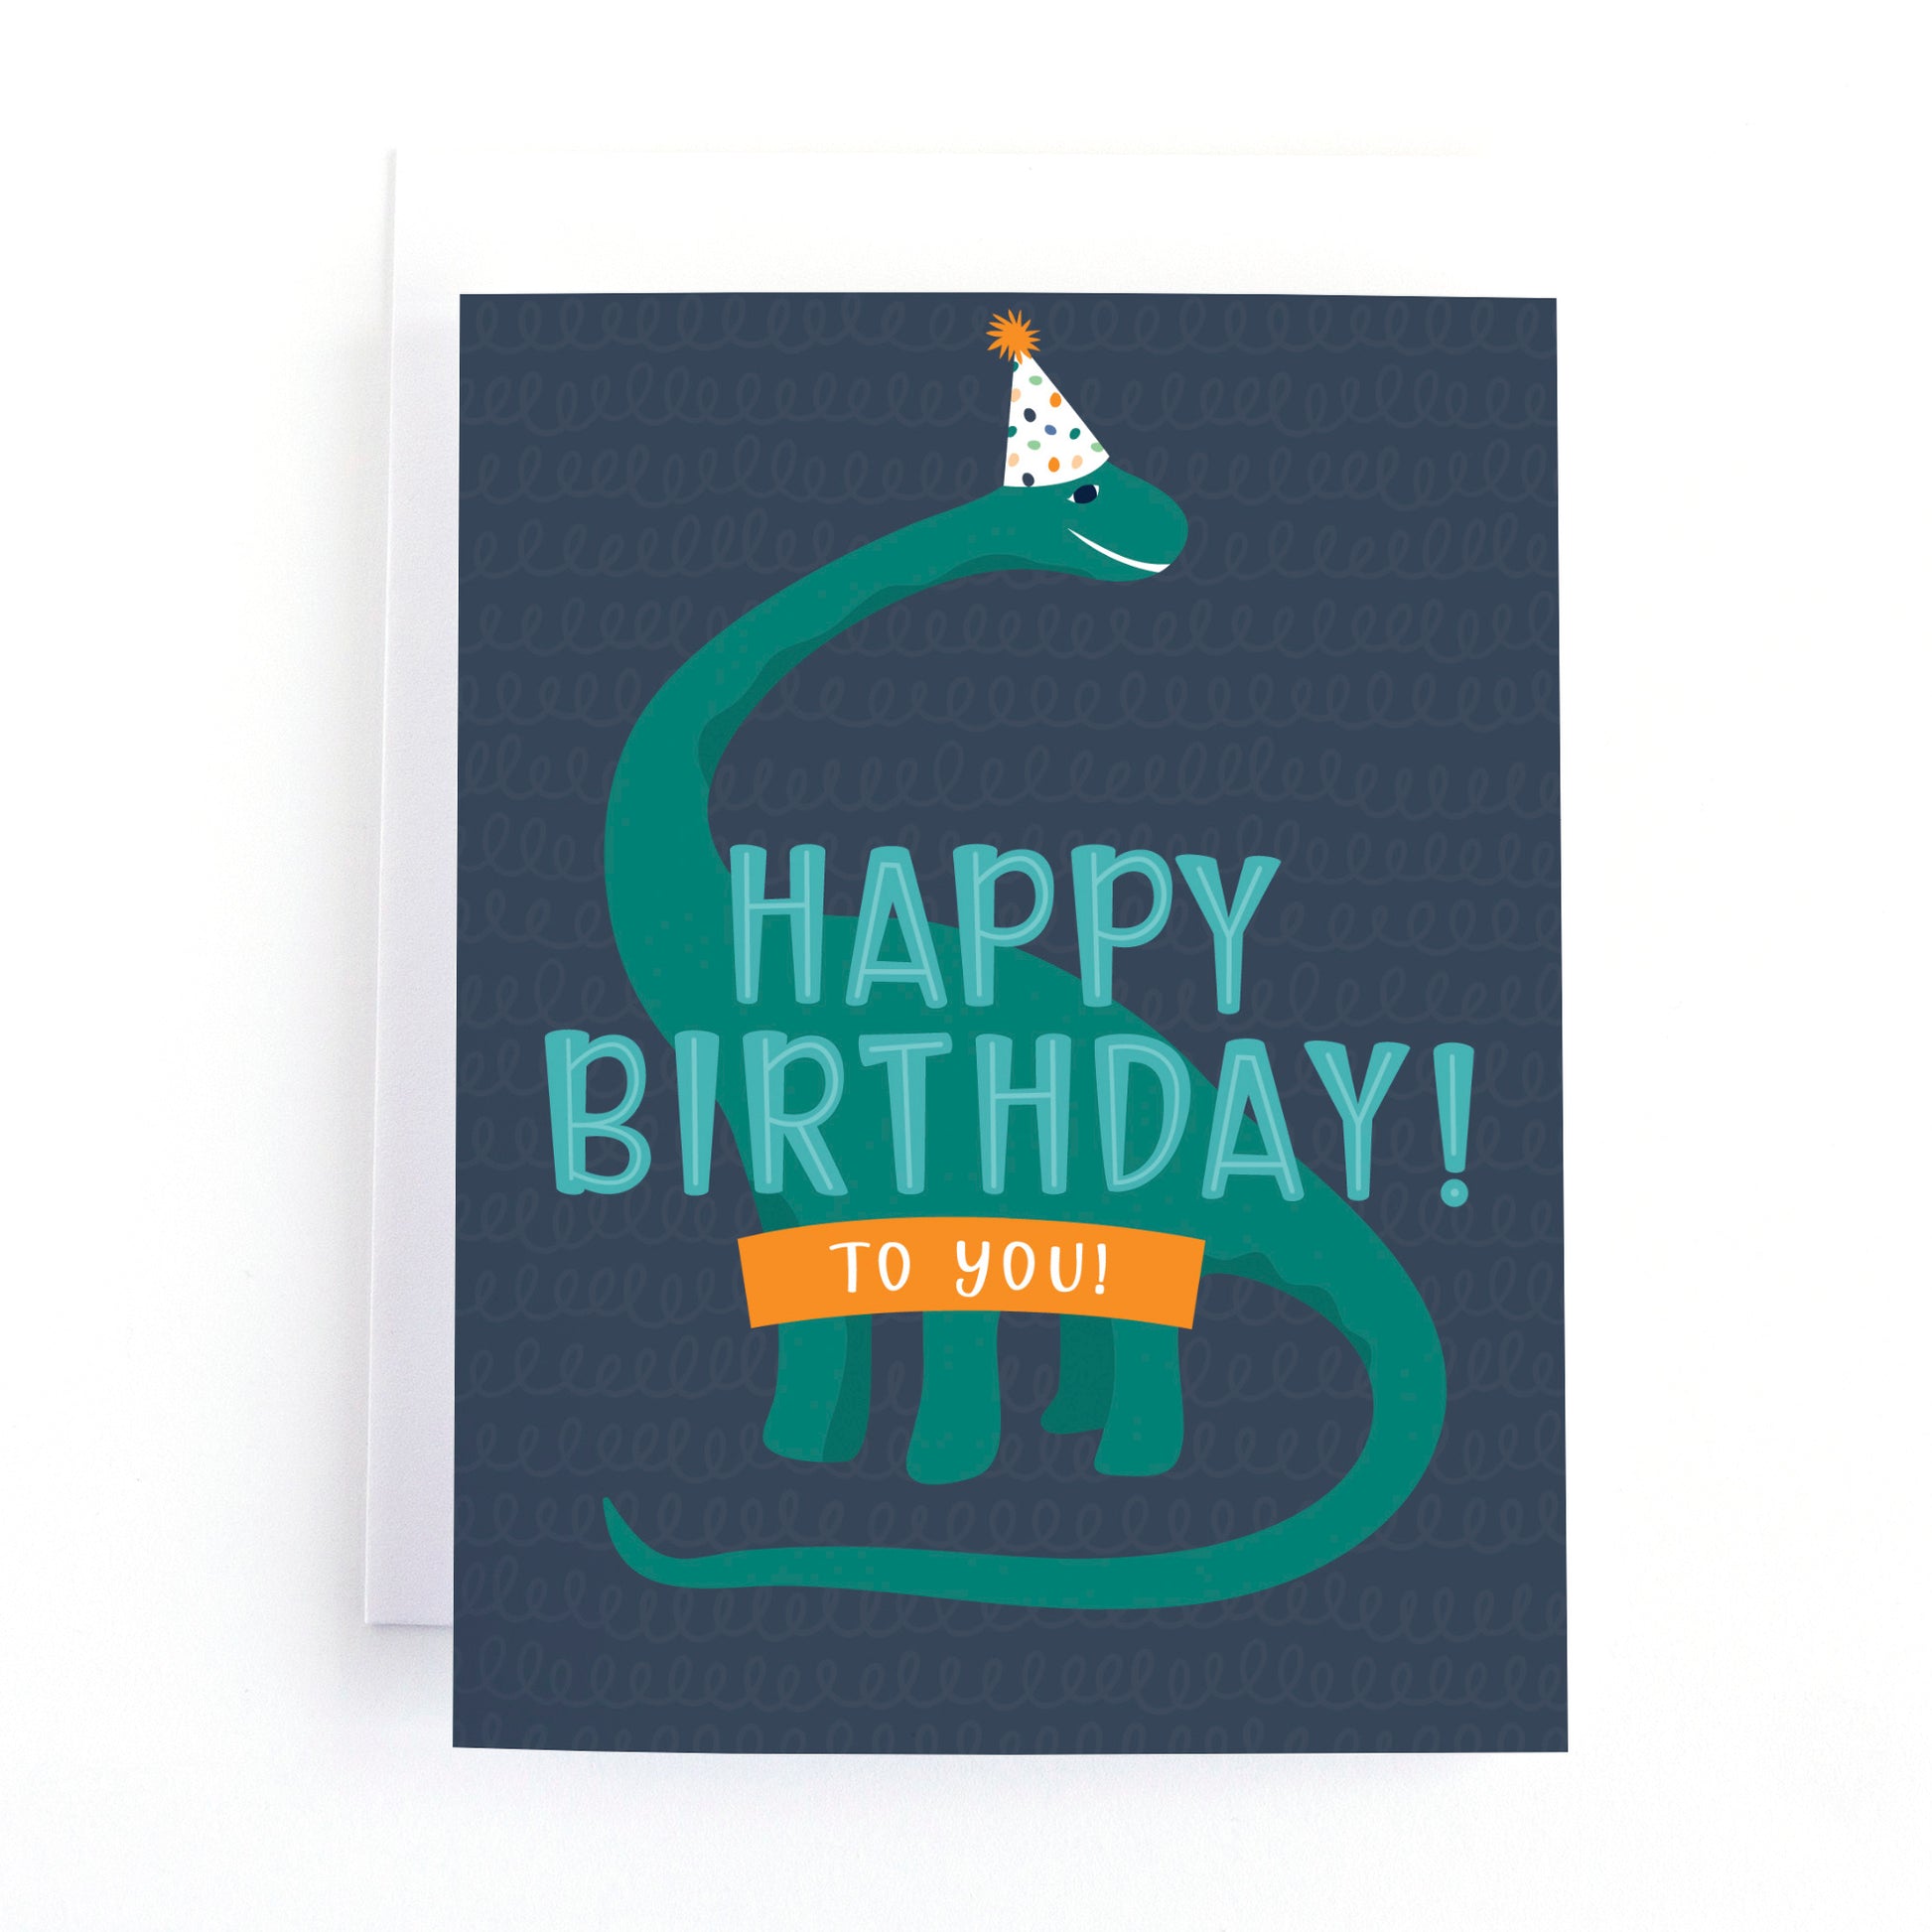 Boy's birthday card with a cute dinosaur wearing a party hat.